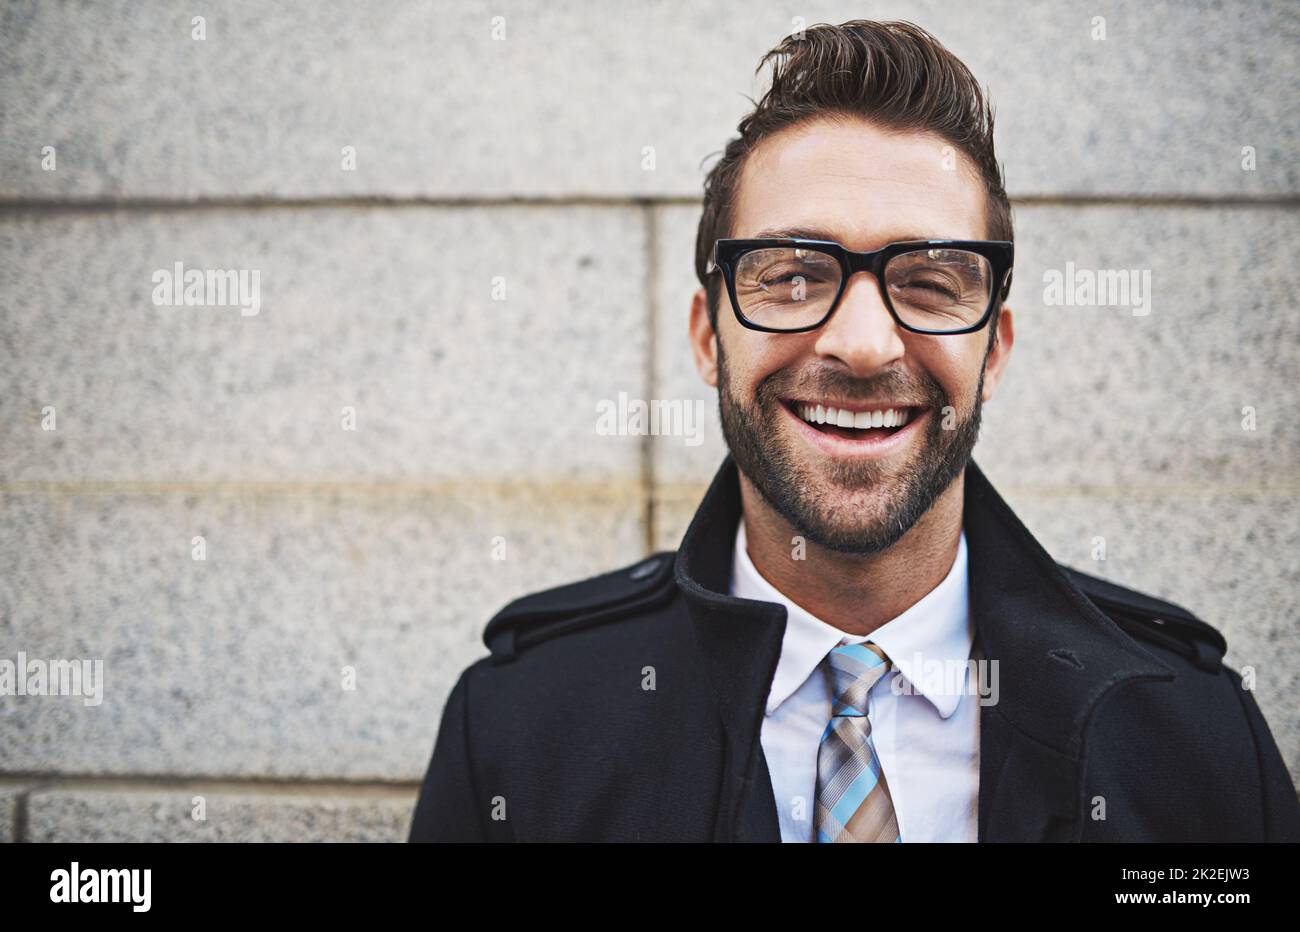 Personable meets professional style. Portrait of a stylish young businessman in the city. Stock Photo